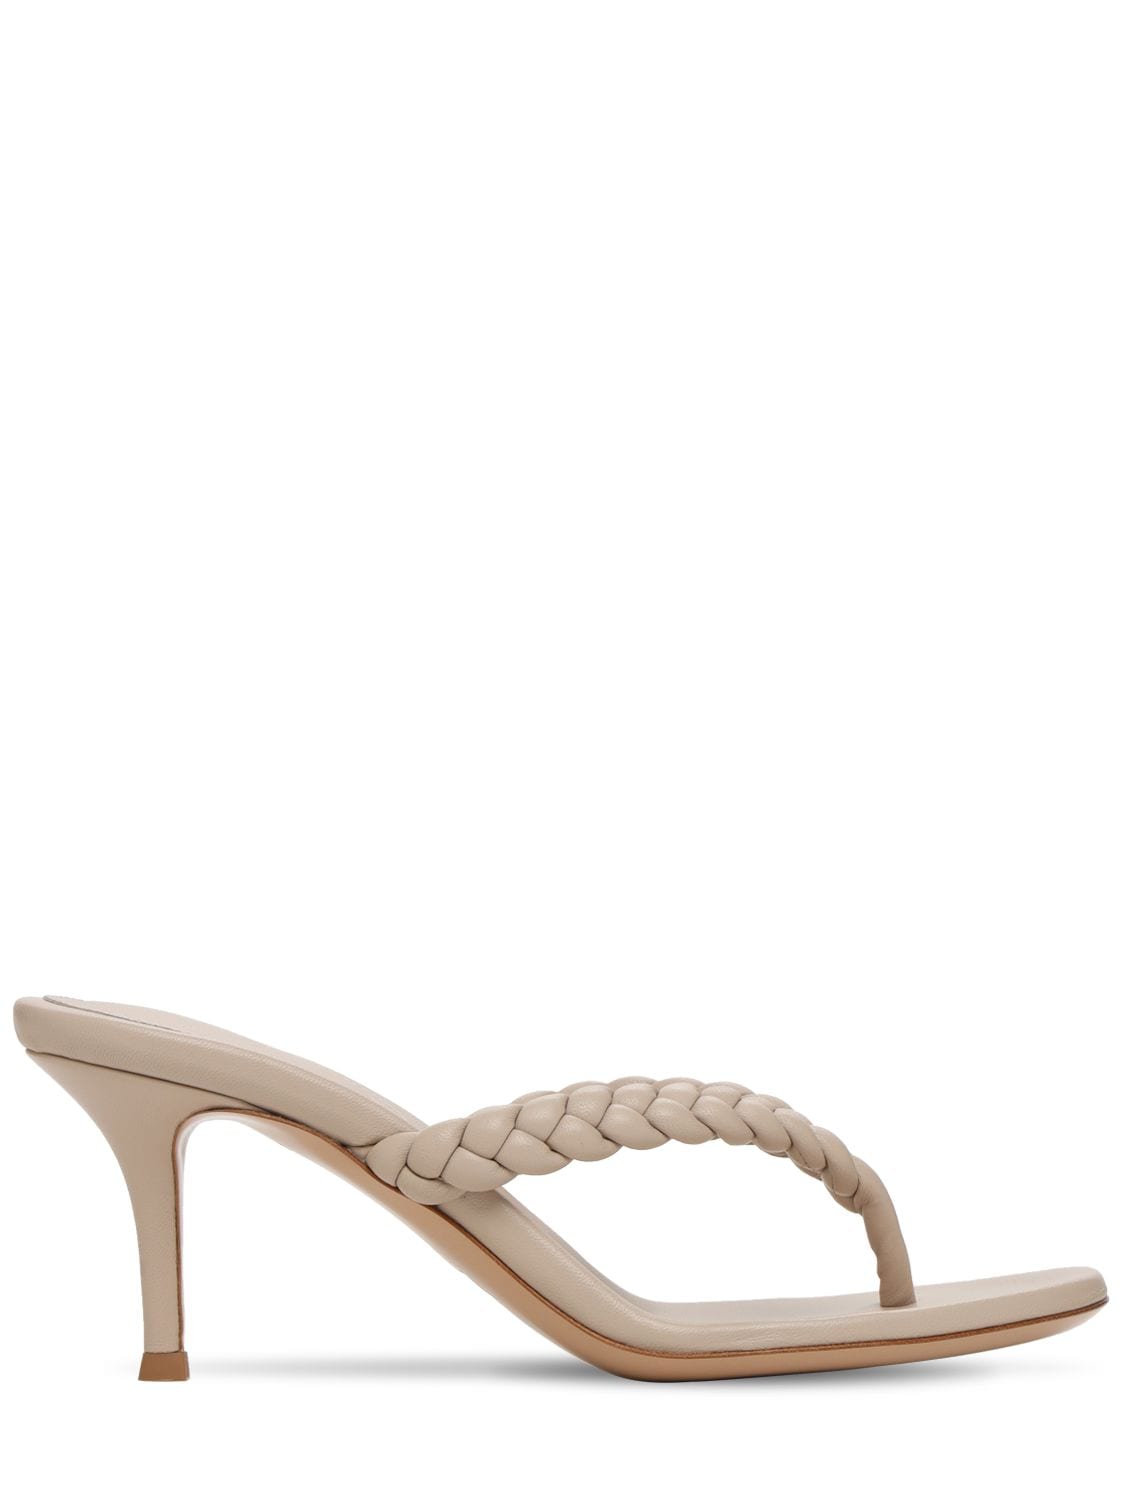 Gianvito Rossi 70MM TROPEA BRAIDED LEATHER THONG SANDAL